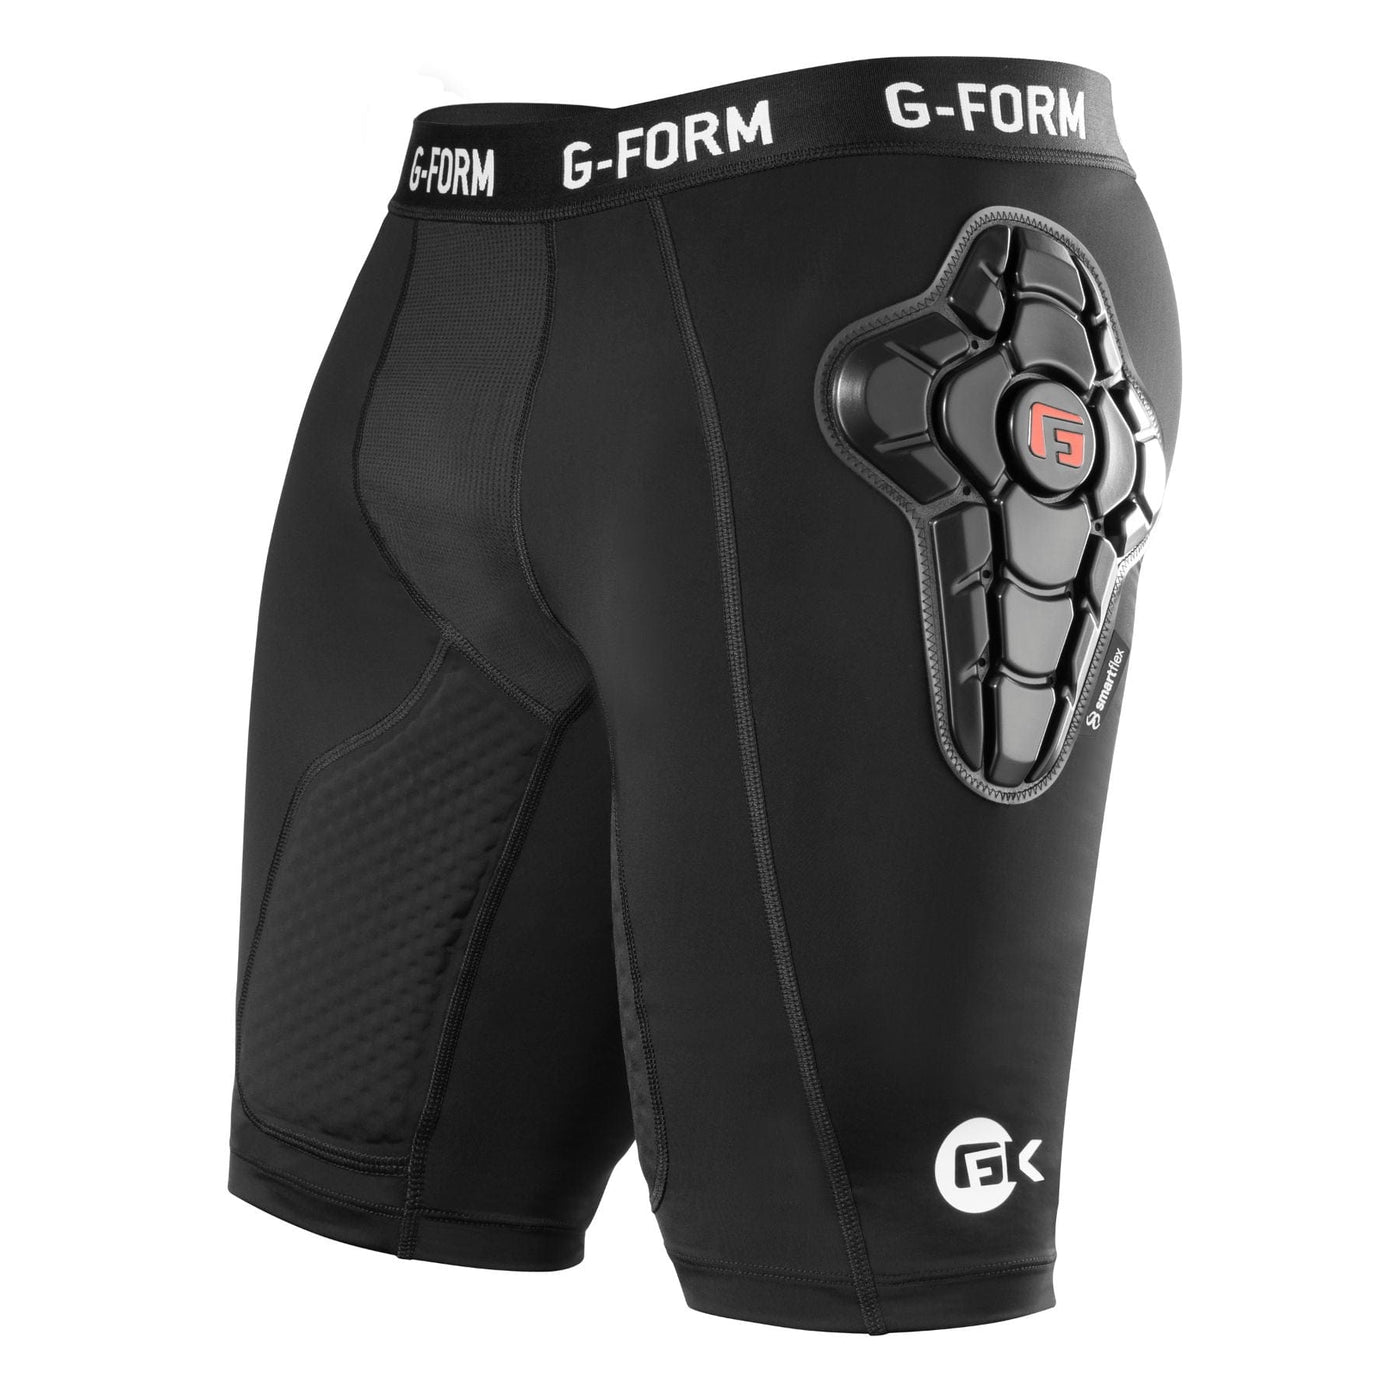 G-Form Compression Football Shorts 8Lines Shop - Fast Shipping